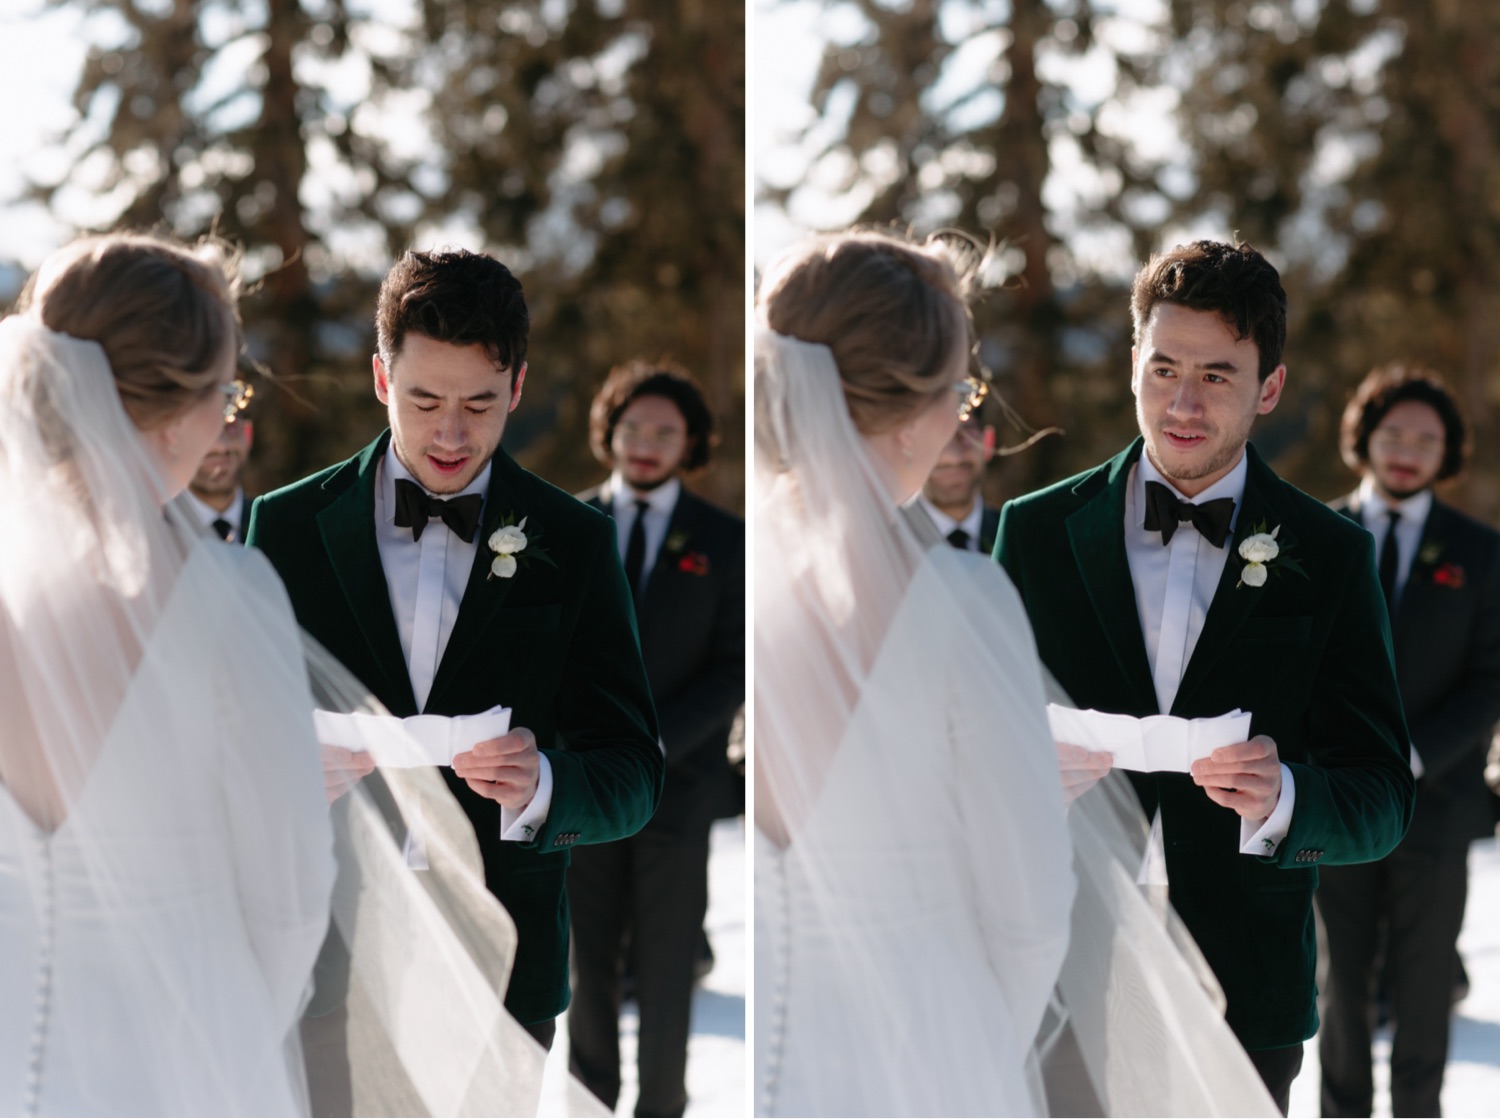 Groom wearing an emerald green suit reading his vows to his wife at Whistler Plateau ceremony spot at Jasper Park Lodge